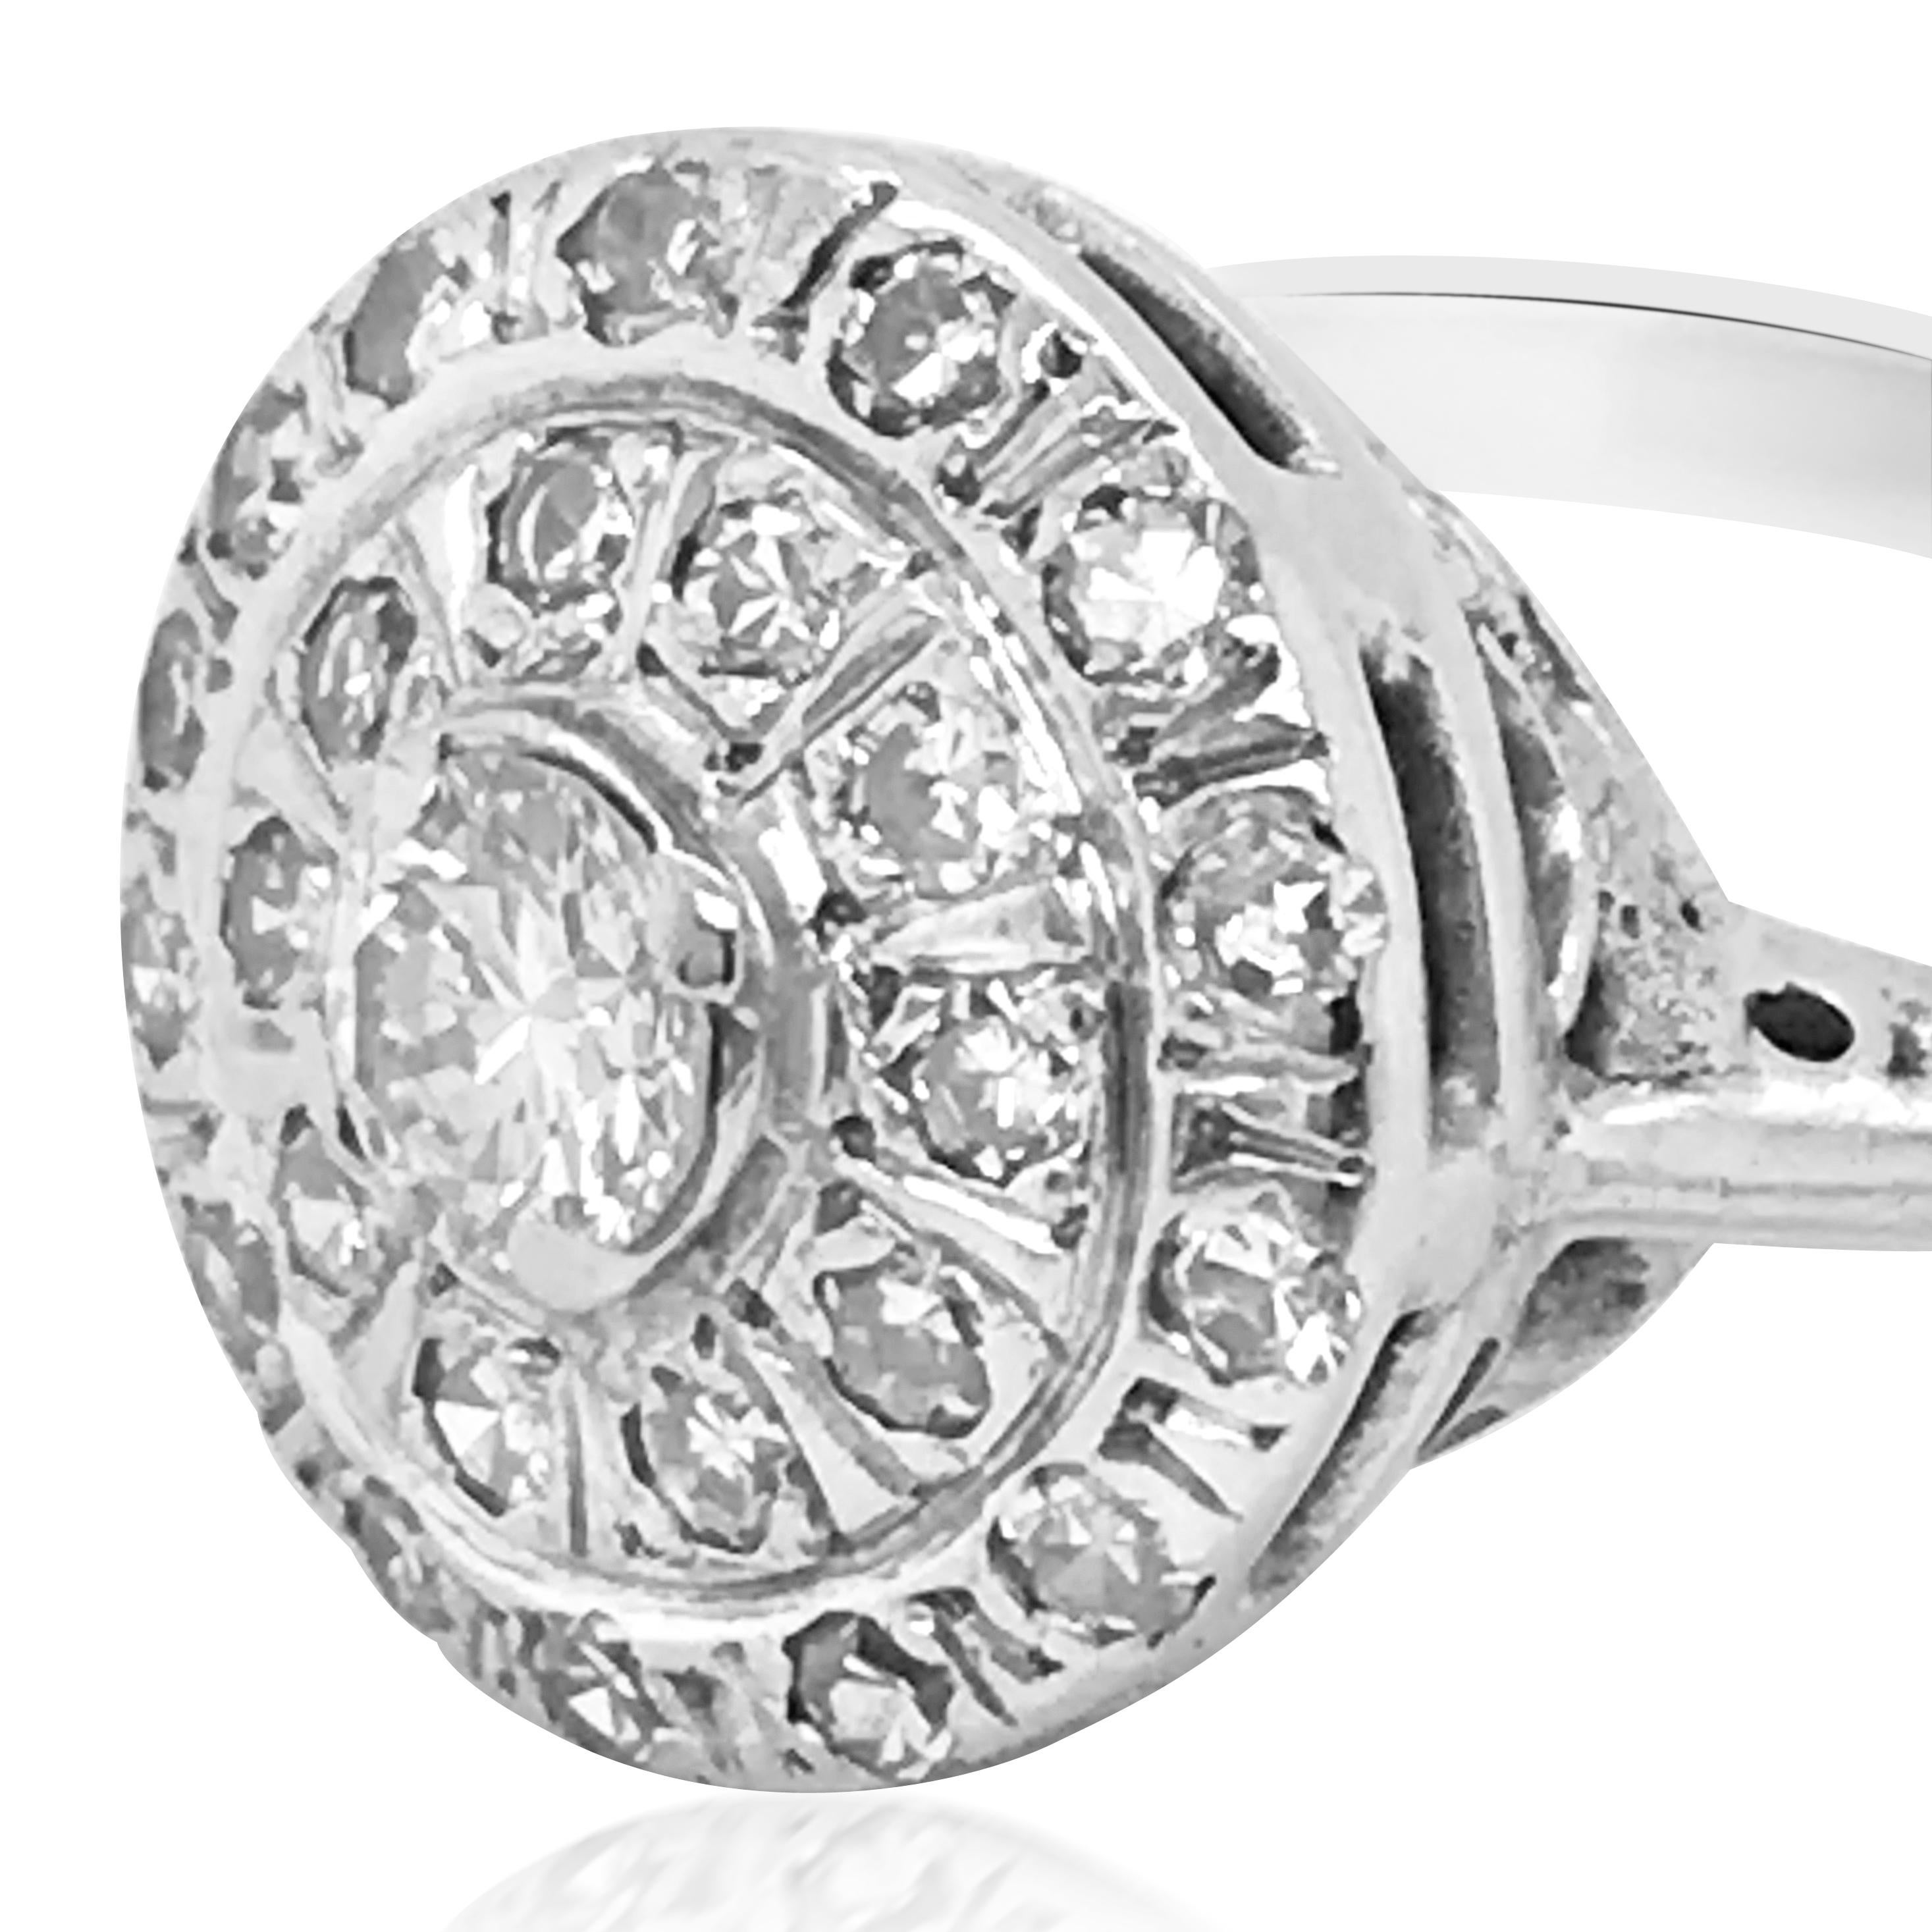 Center round diamond 0.2ct, 25 round diamonds total approx. 0.3ct.
Ring size: 7.25
Weight: 3.3 grams